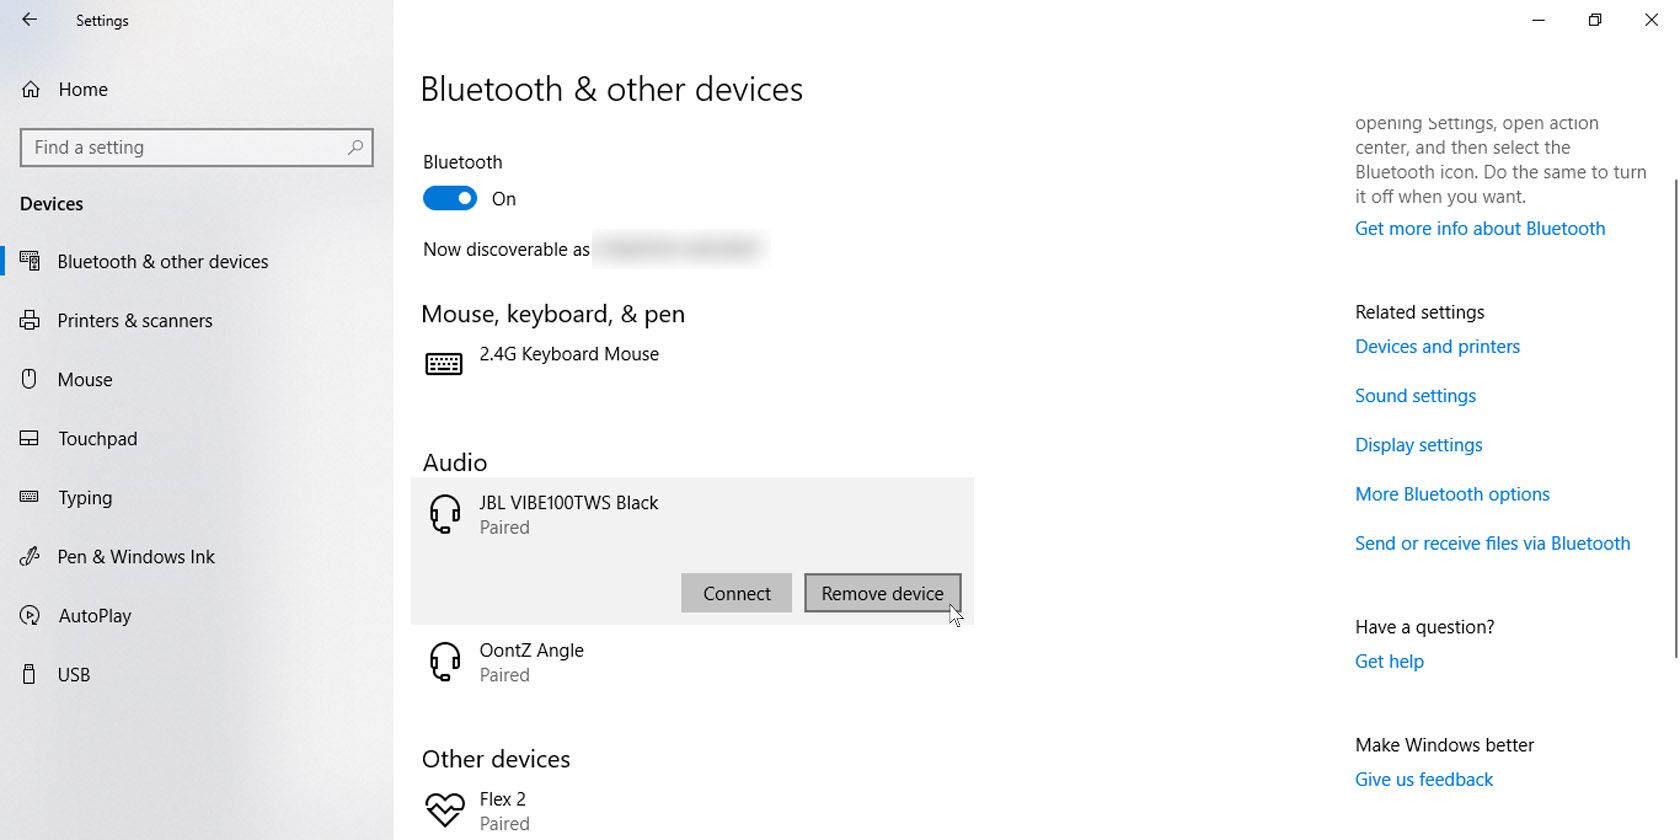 Unpair or disconnect Bluetooth devices